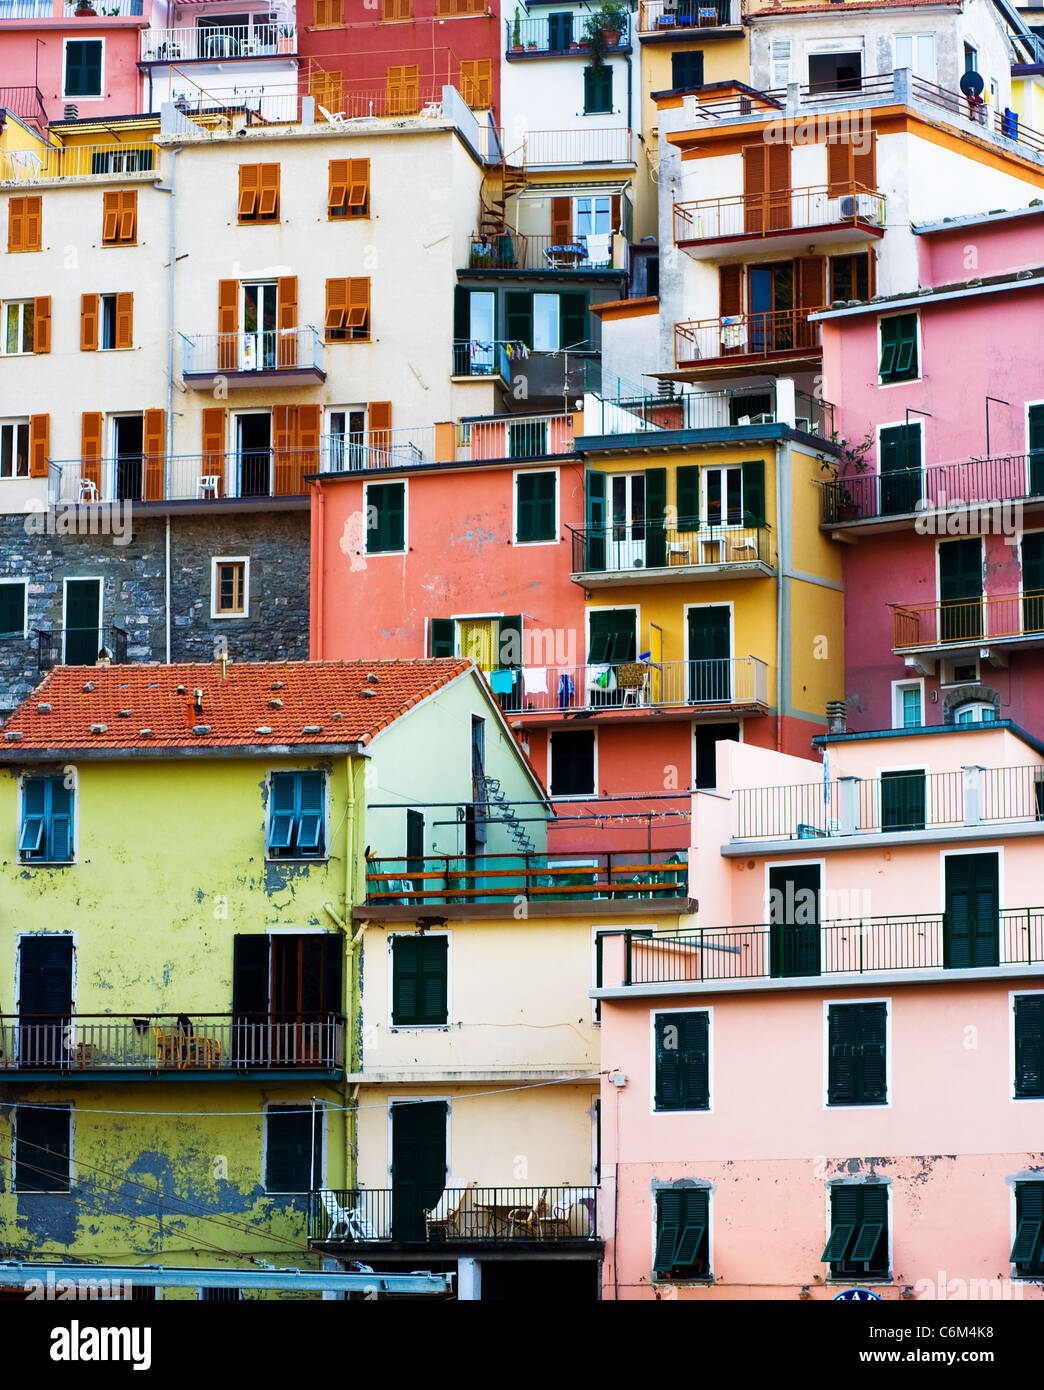 Colorful Buildings in Cinque Terre, Italy. Stock Photo